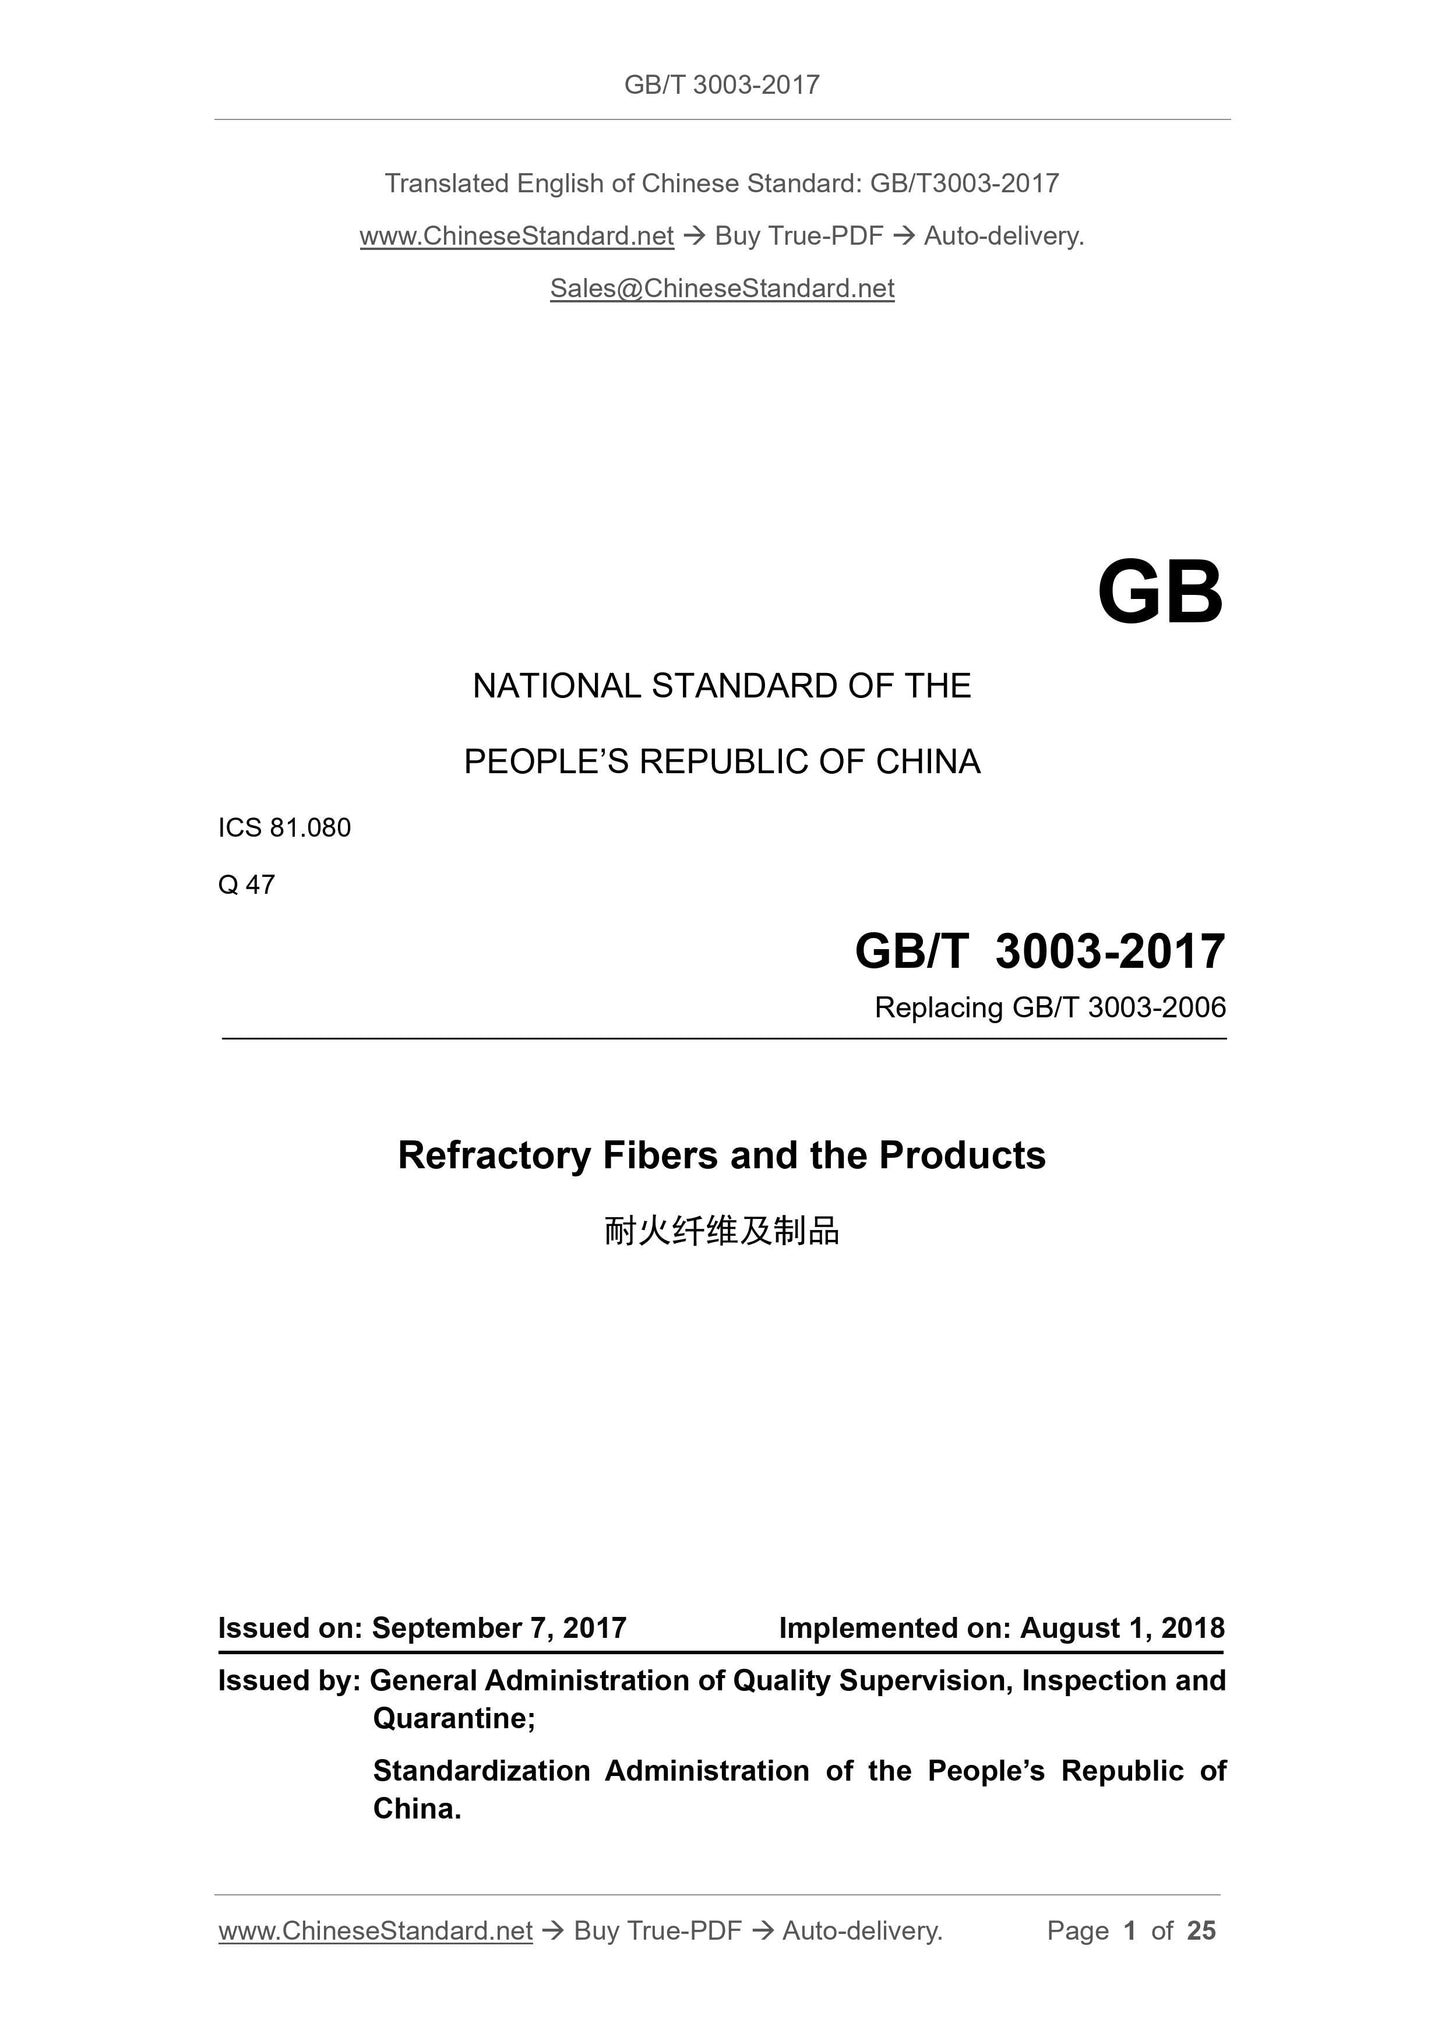 GB/T 3003-2017 Page 1